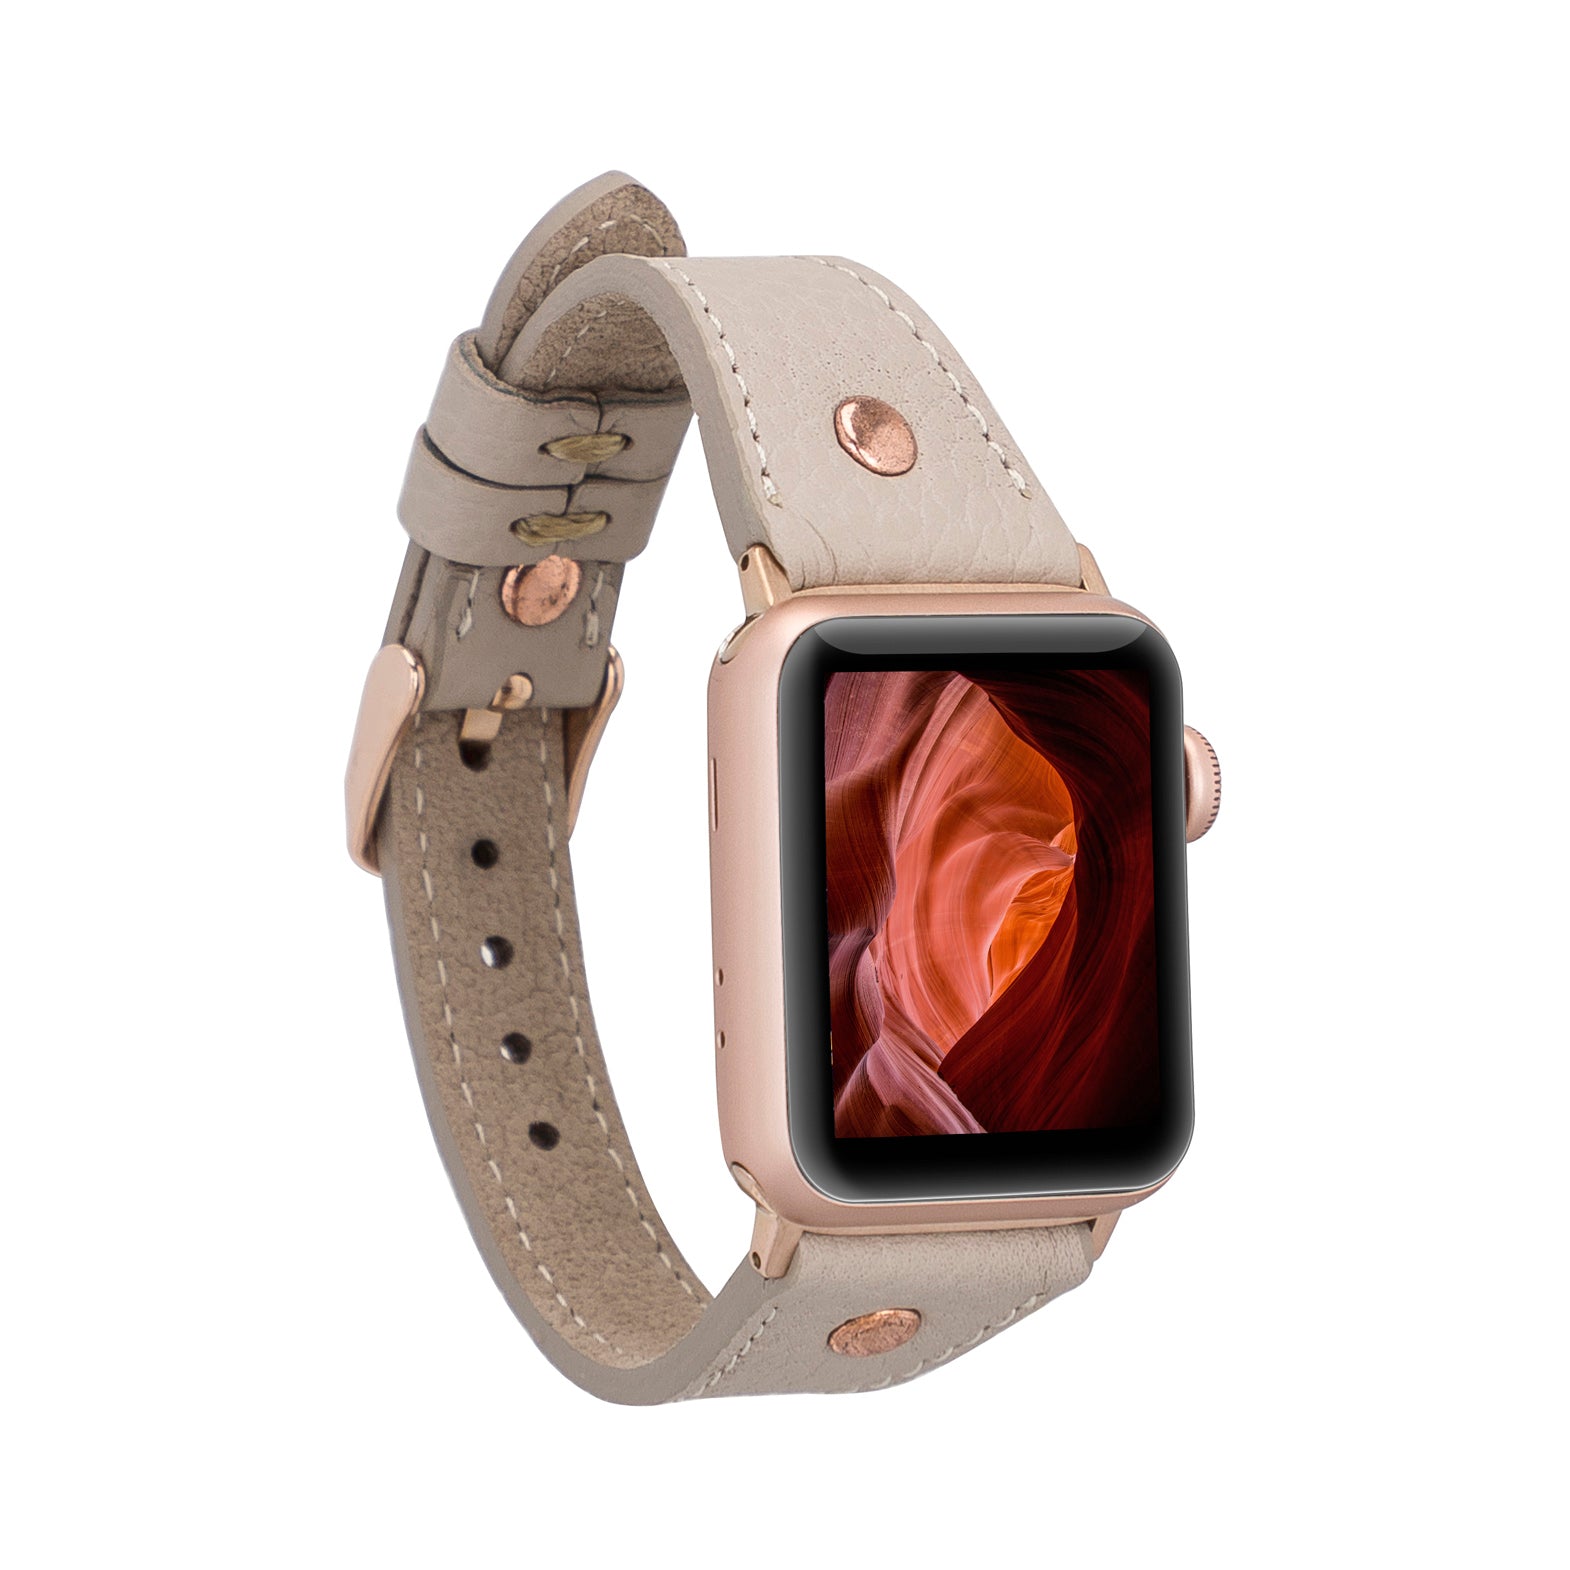 Slim Strap - Full Grain Leather Band for Apple Watch - GRAY